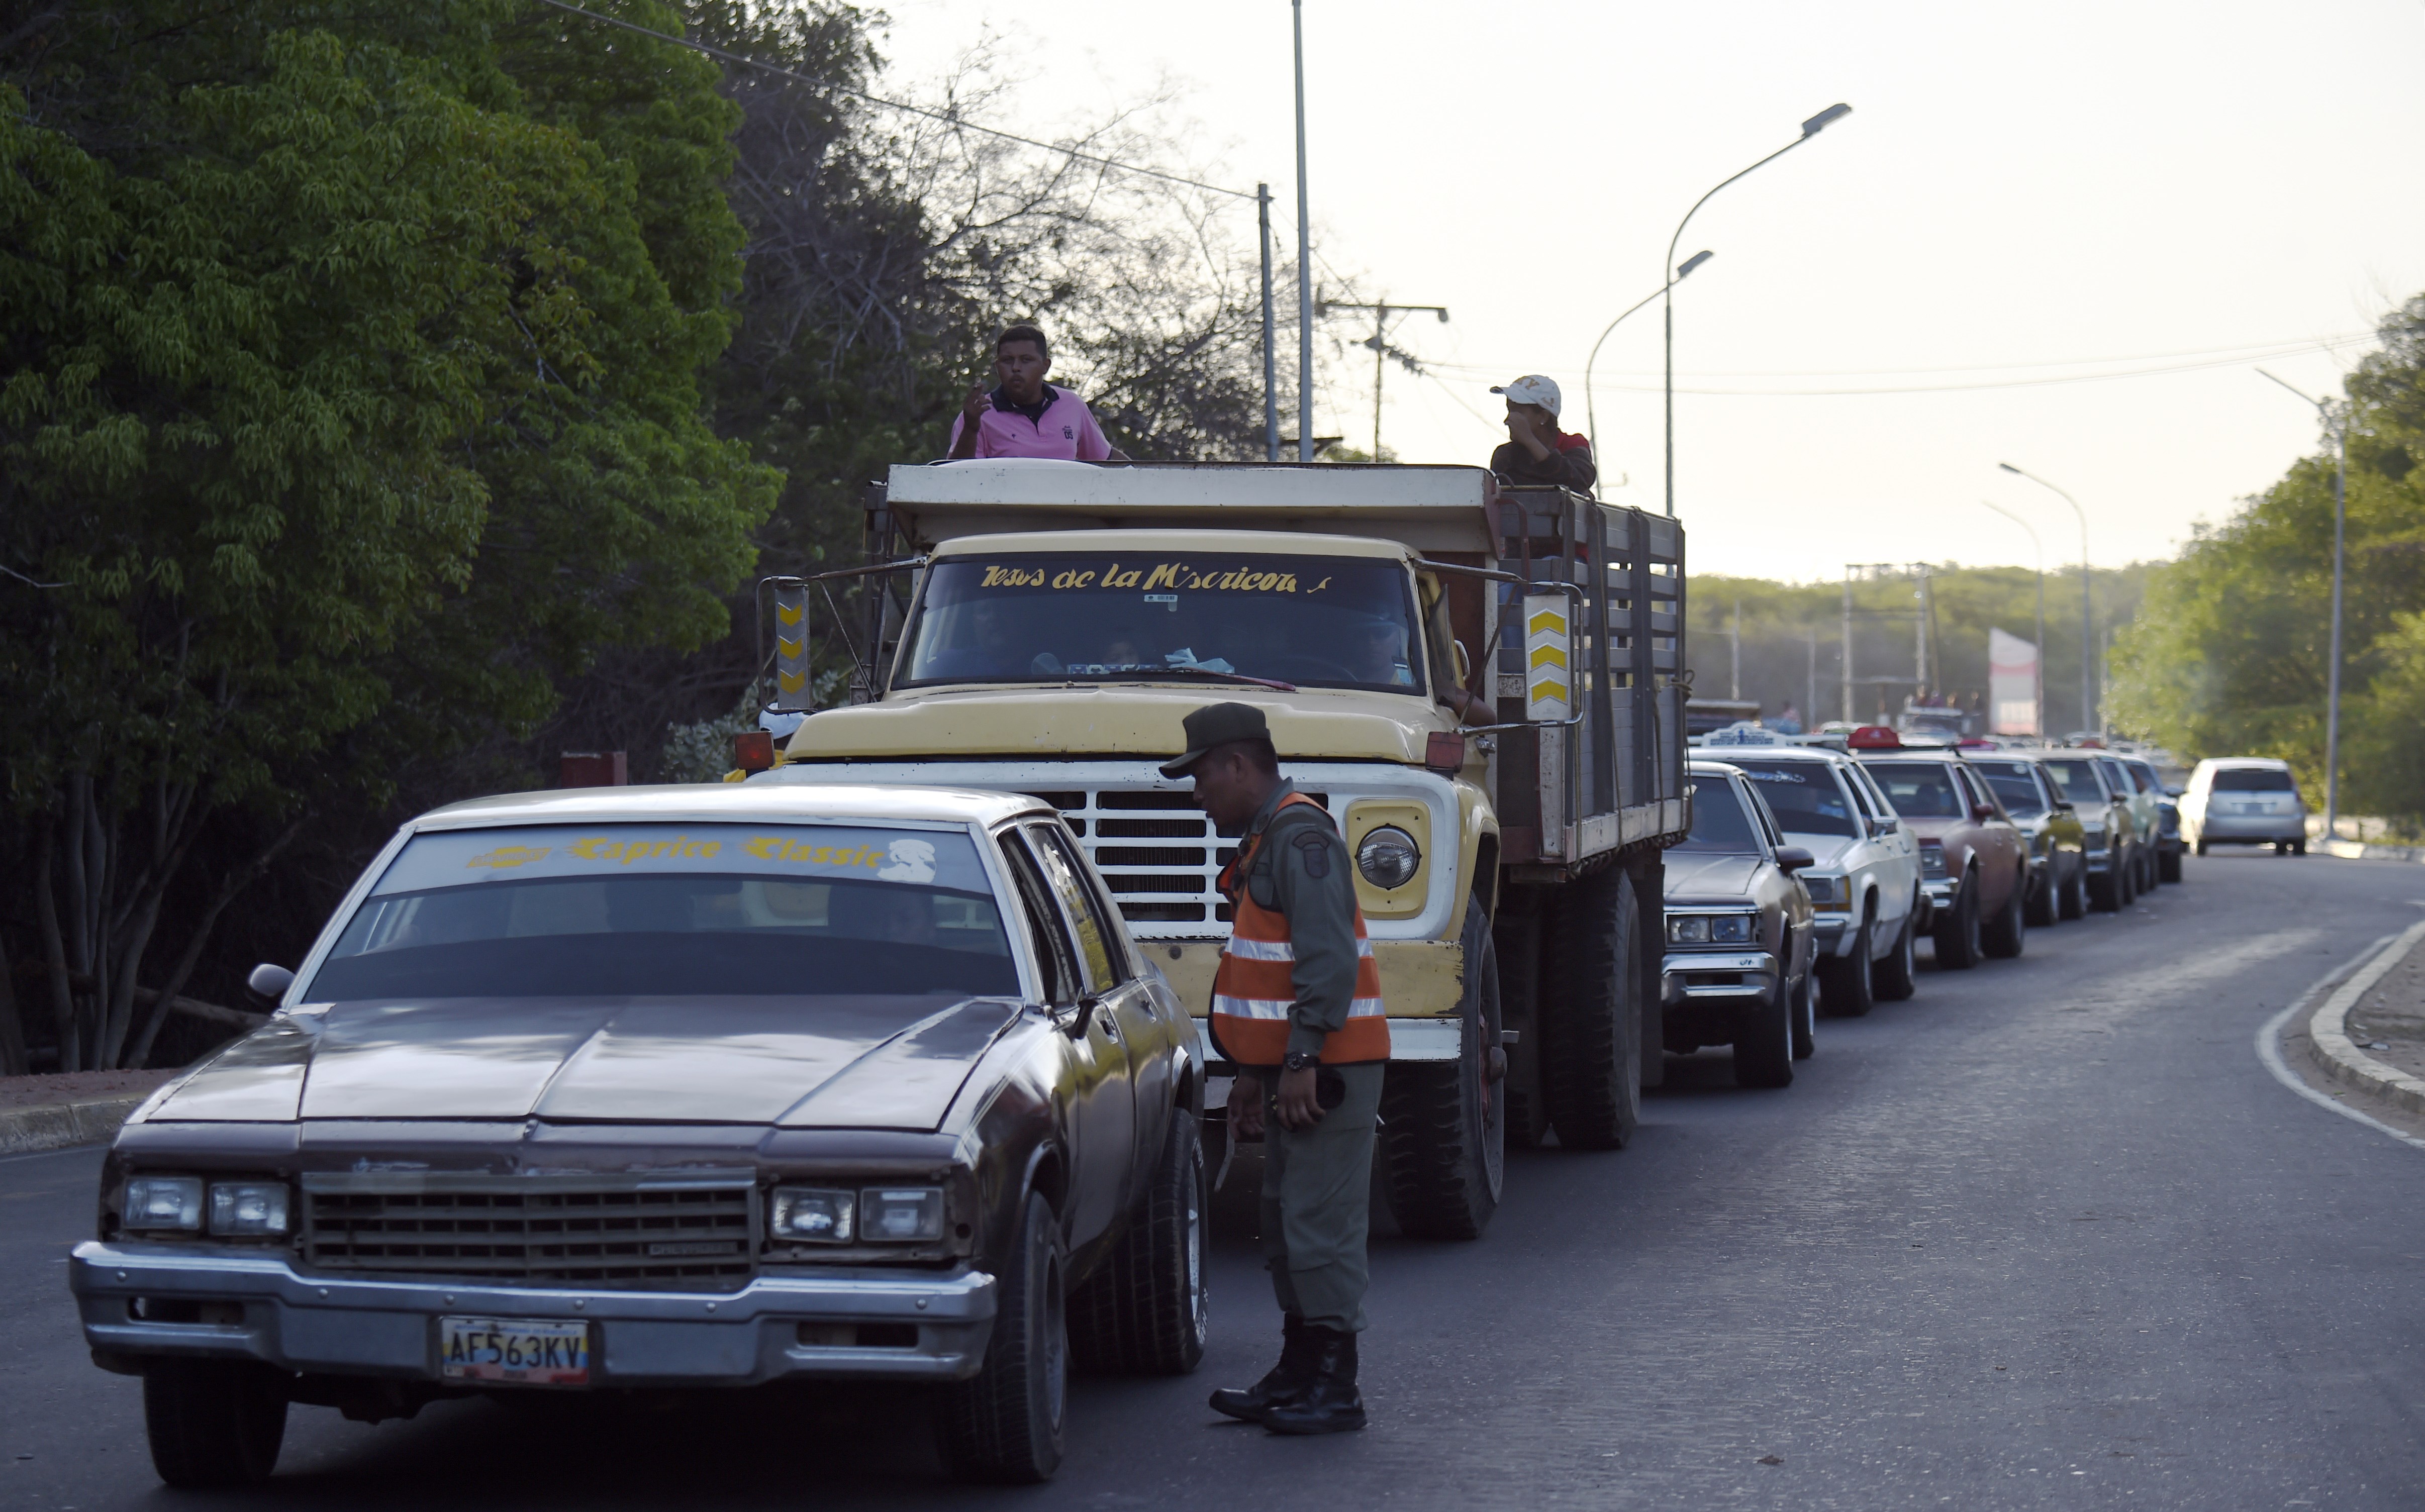 Members of the Venezuelan national guard are pictured at a checkpoint in the municipality of Limon, Zulia State, Venezuela, in the border with Colombia, on Sept. 10, 2015. On Aug. 19 Venezuela President Nicolas Maduro closed part of the border with Colombia and ordered the expulsion of some 1,500 Colombians living in Venezuela. Another 18,500 have fled, the United Nations said earlier this week. (JUAN BARRETO/AFP via Getty Images)